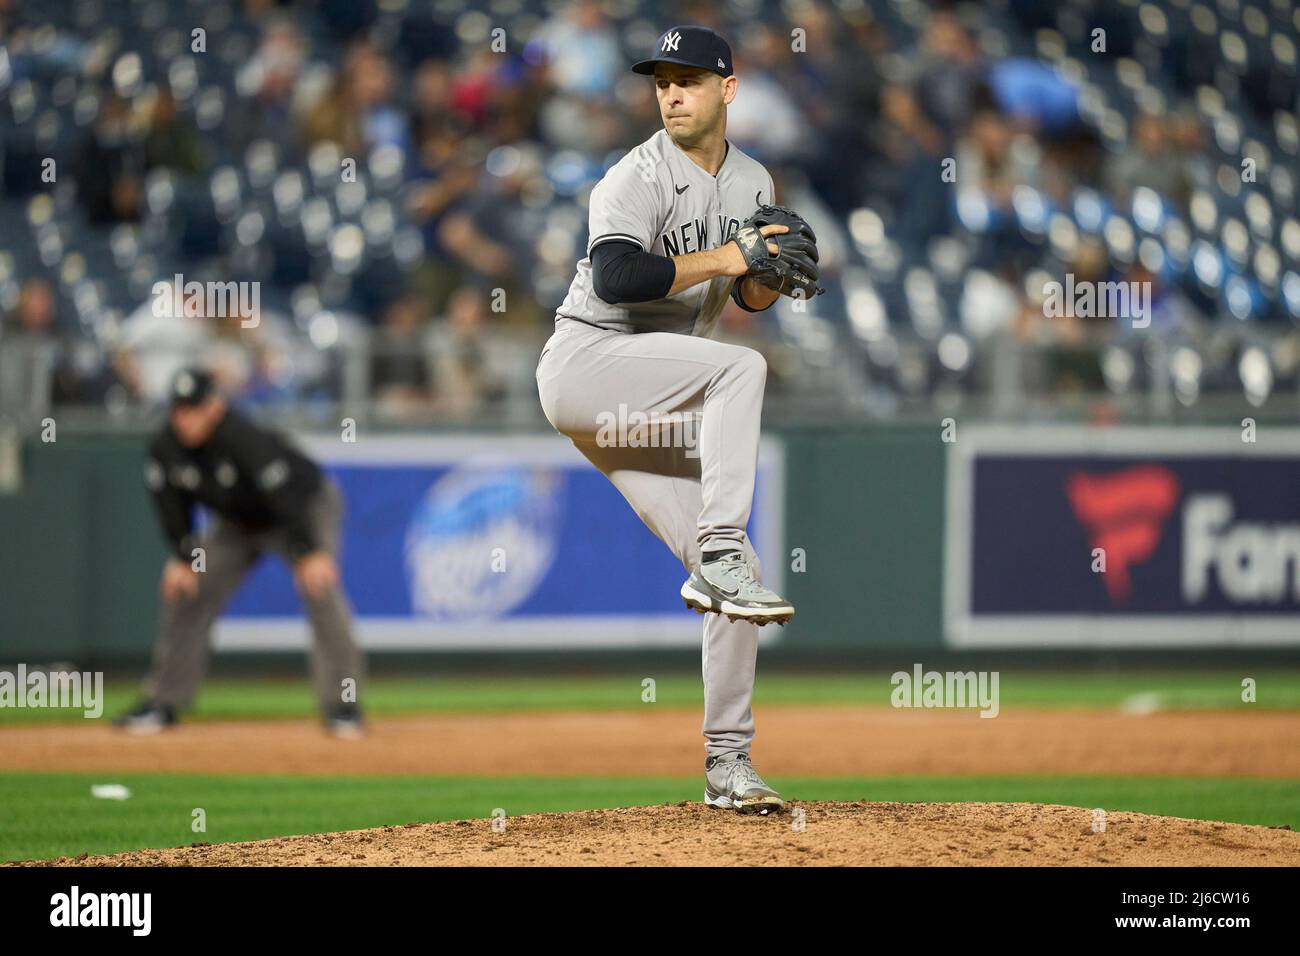 April 29 20261: New York first baseman Nestor Cortes (65) throws a pitch  during the game with New York Yankees and Kansas City Royals held at  Kauffman Stadium in Kansas City Mo.